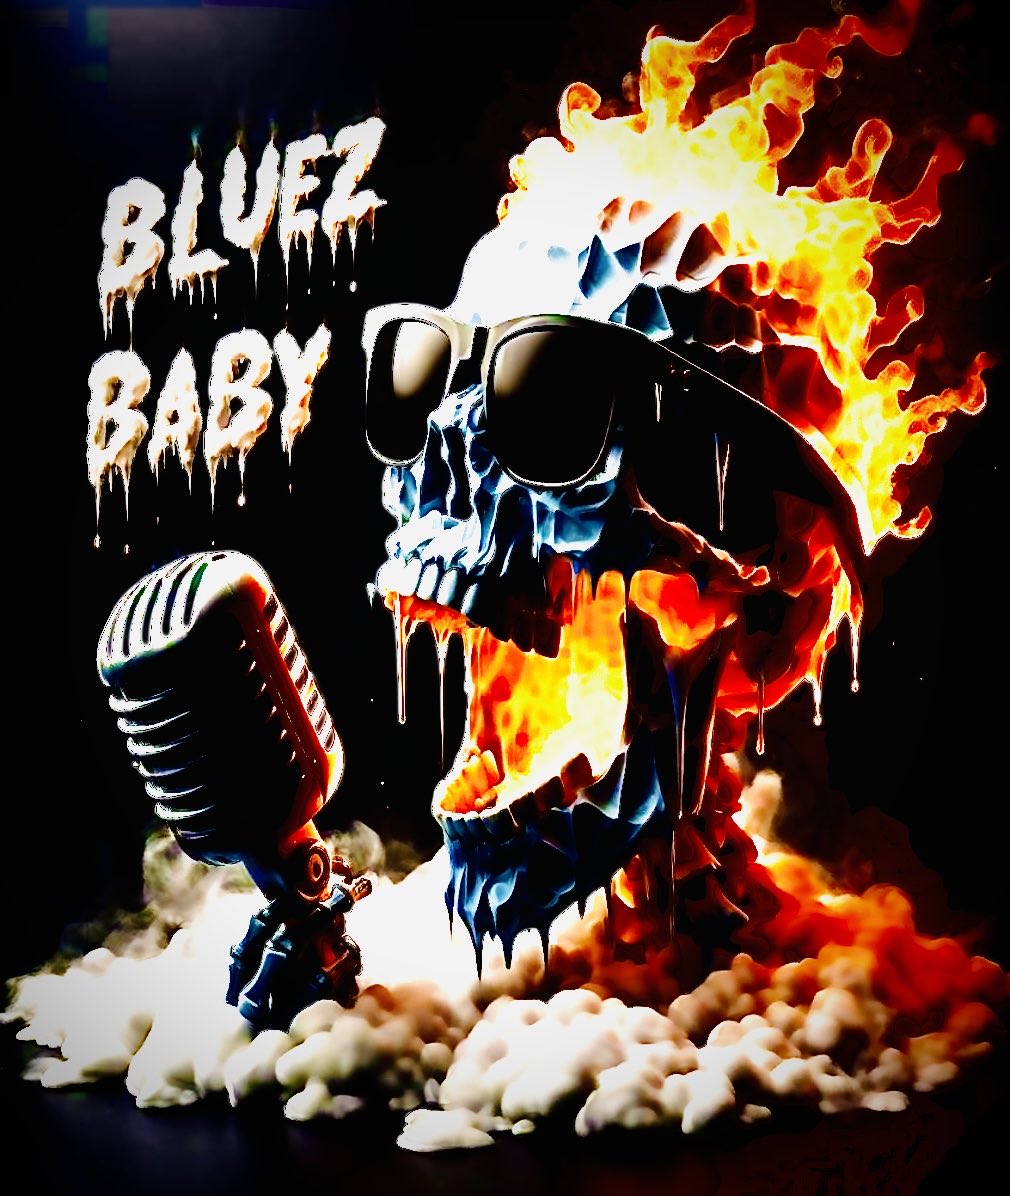 #ICreate #Bluez #Baritone #Harmonica #Octaves #Raspy #SelfProduced  #Slides #Strat #FeelTheVibe #ColdAsIce #Sadsweetdreamer coming in the fall of 2024!#LetsRoll #MissingYou #AngelsAbove #Bitching #Biting #Stinging #StoryTeller #AllAlone #Truth #Tenor #Mixing #Rolling #Overdrive